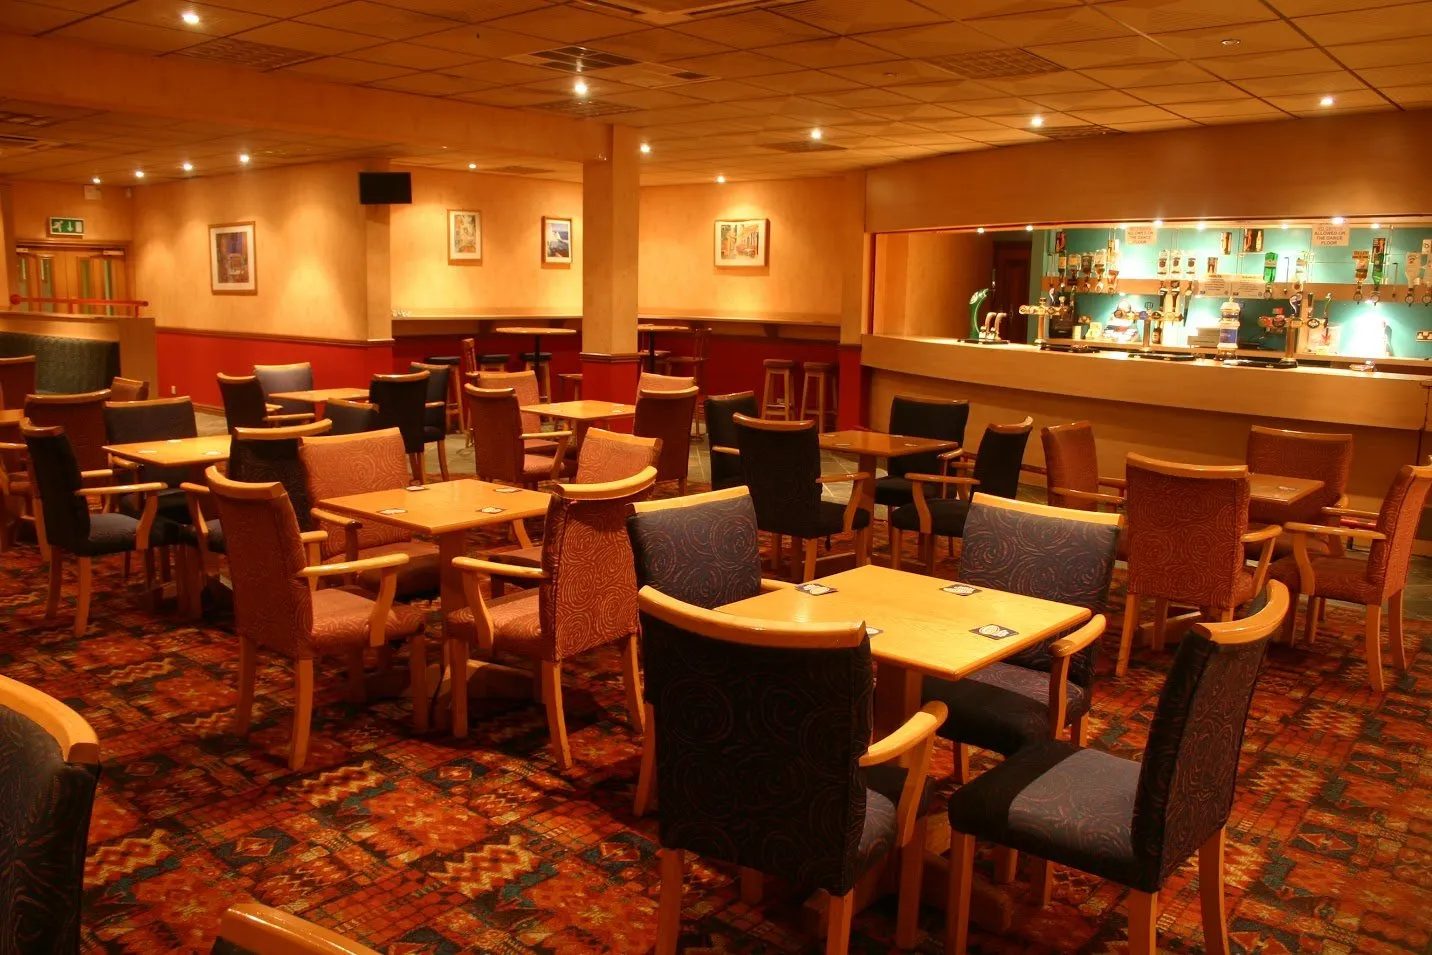 Standard Triumph Club function room with bar and seating area